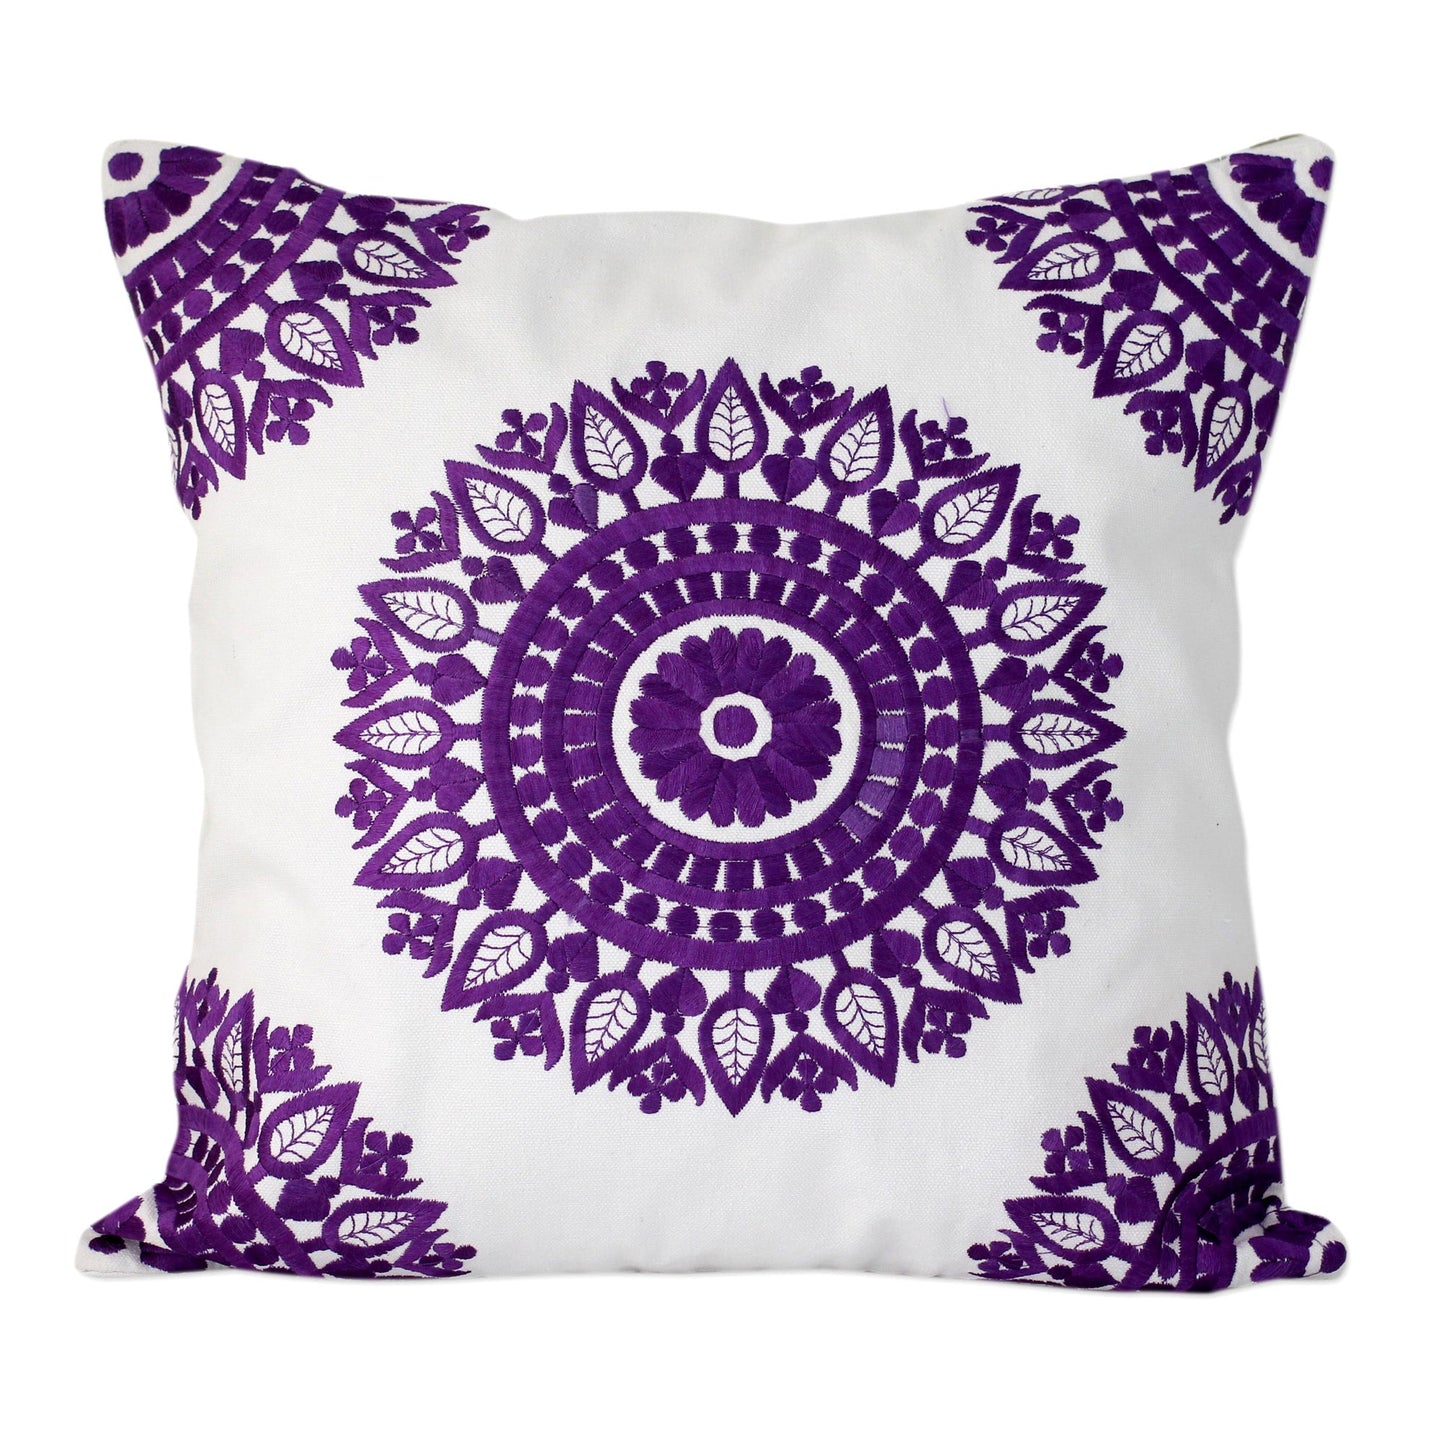 Amethyst Mandalas Embroidered Purple on White Cushion Covers from India (Pair)